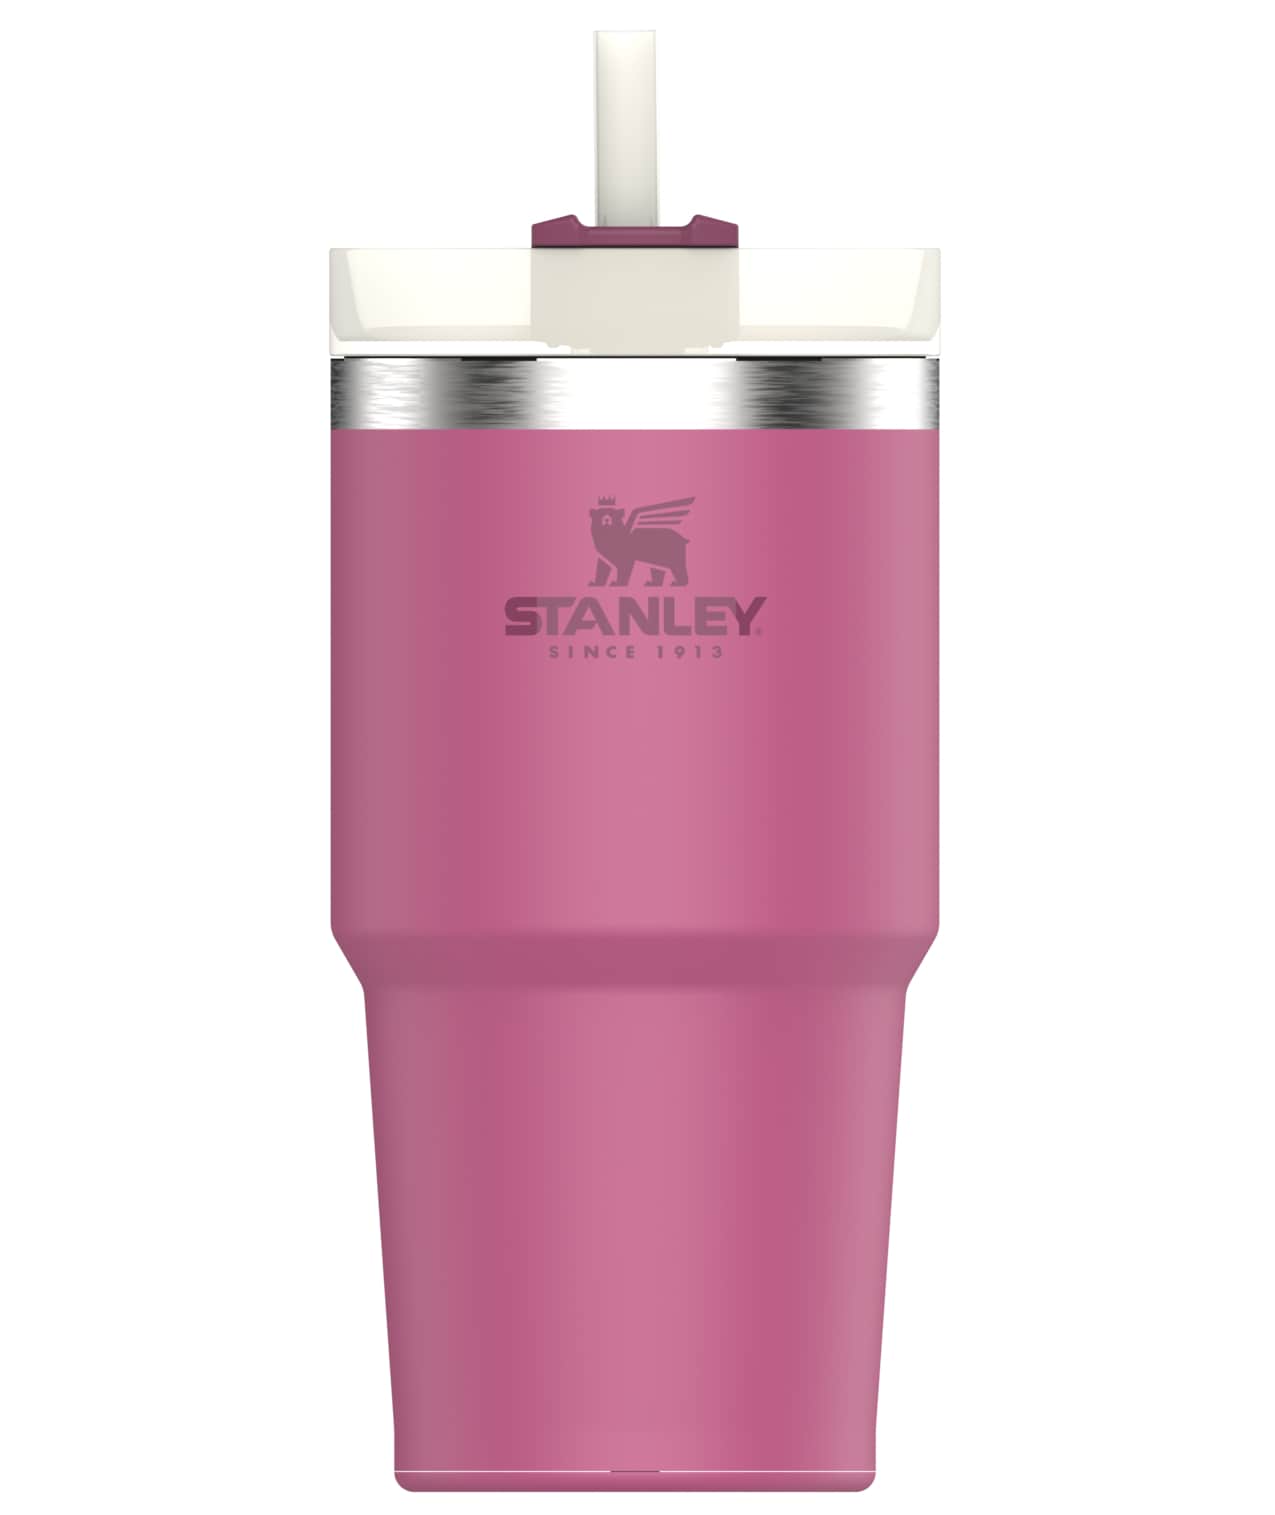 Stanley 20-fl oz Stainless Steel Insulated Water Bottle at